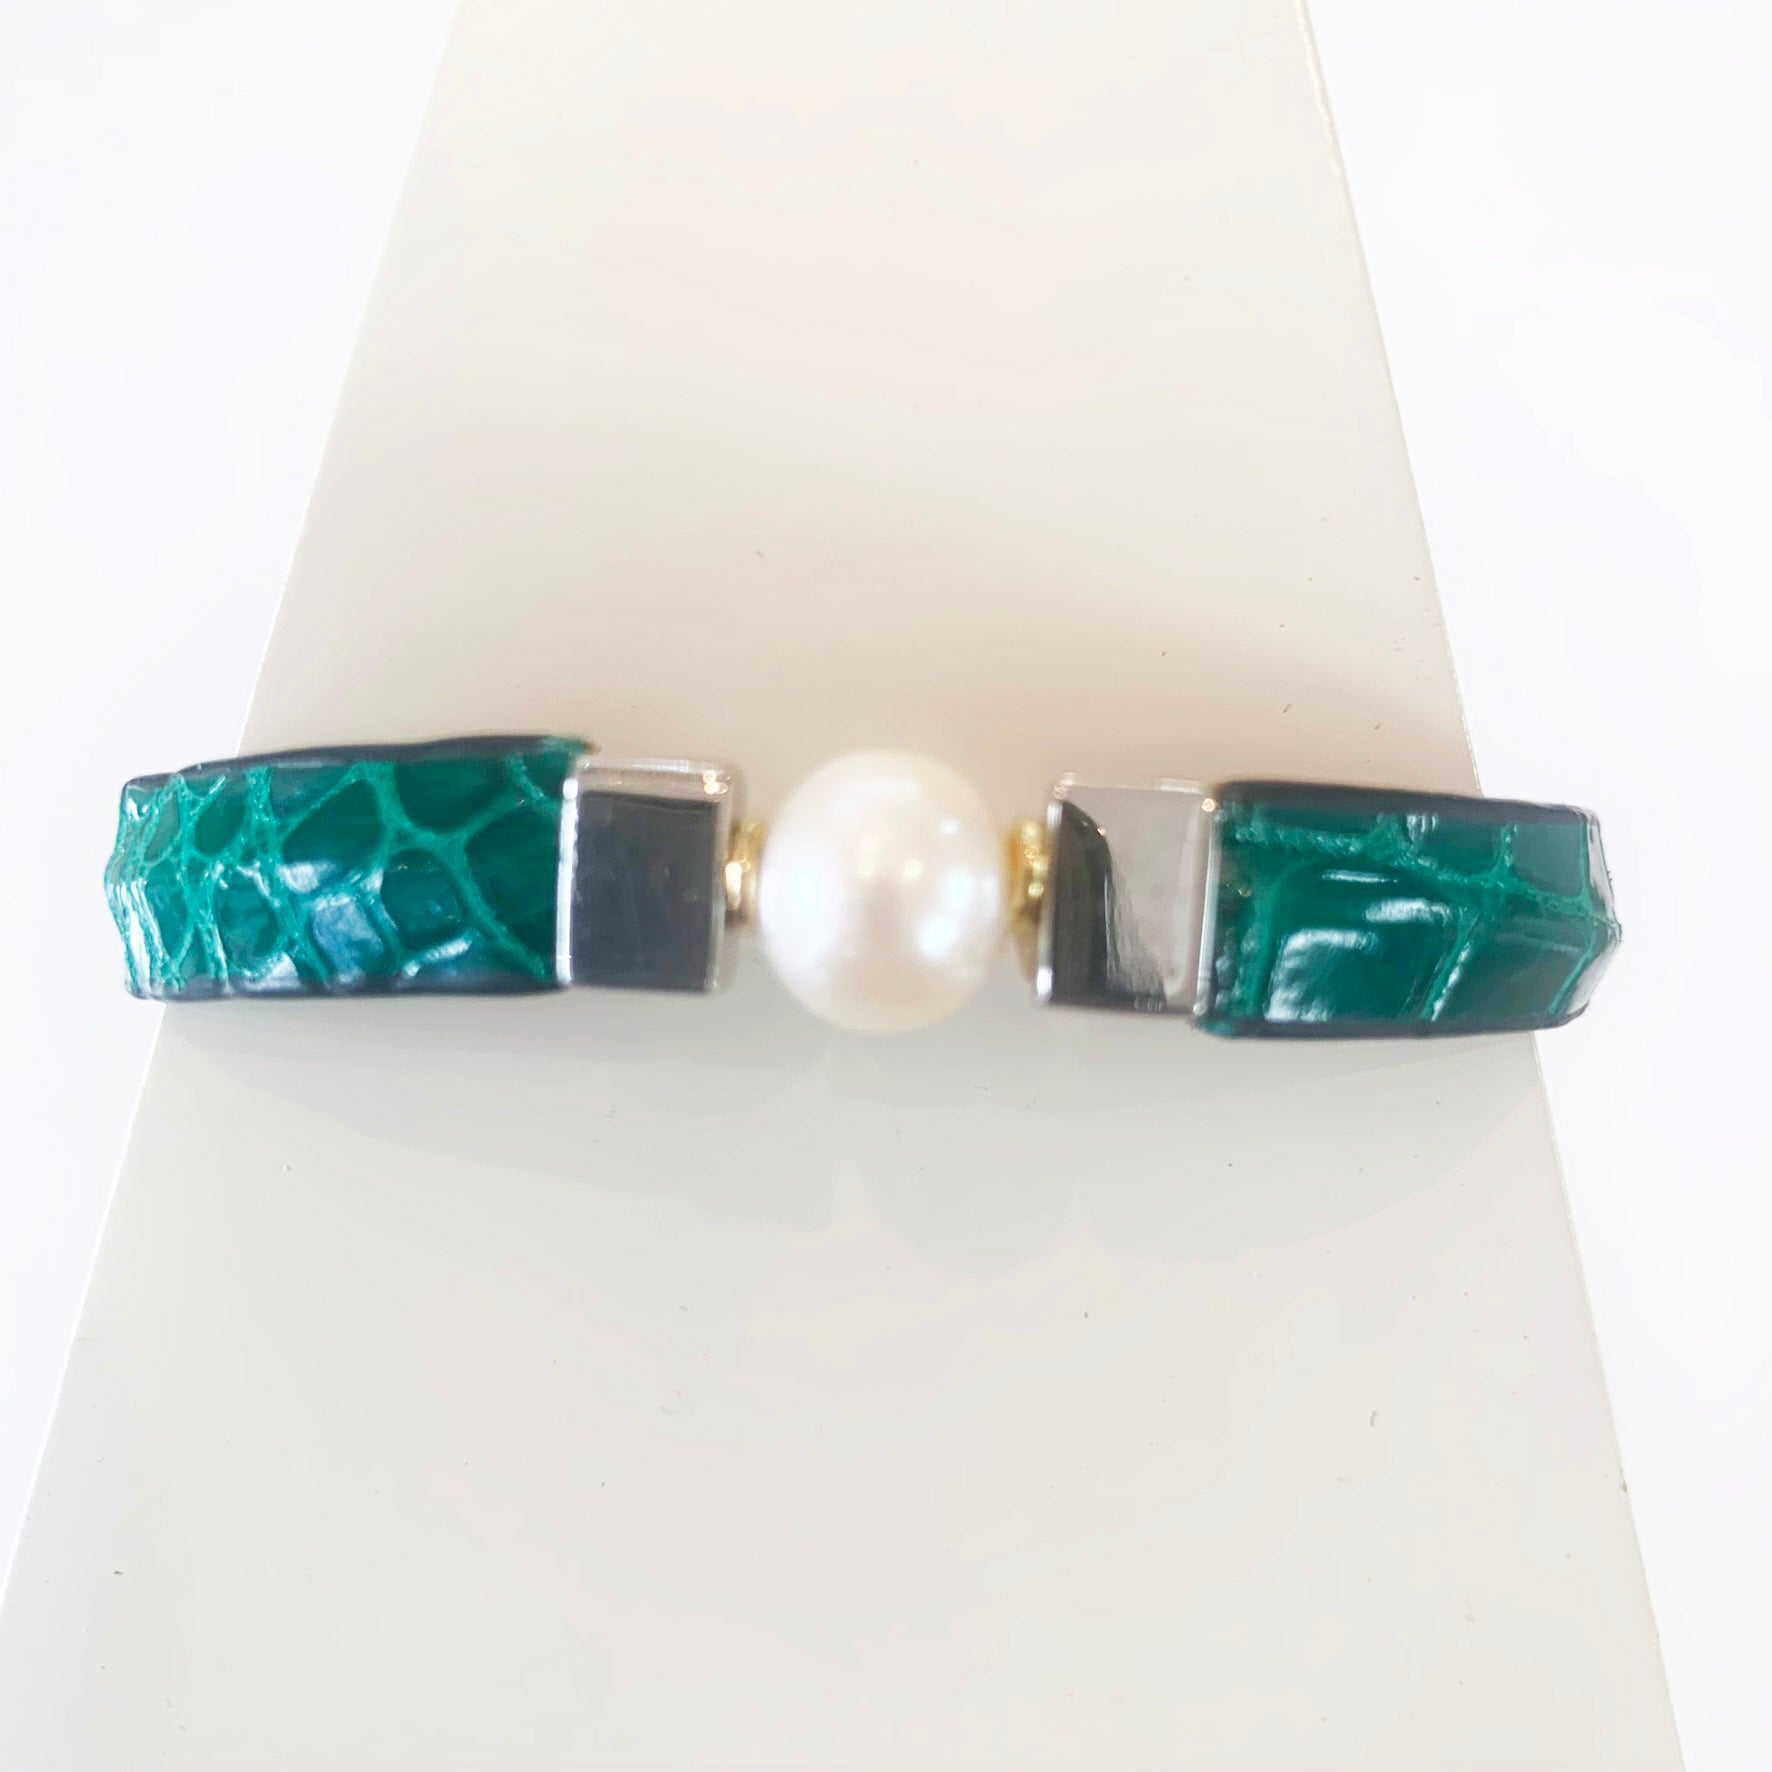 Crocodile belly and pearl bracelet